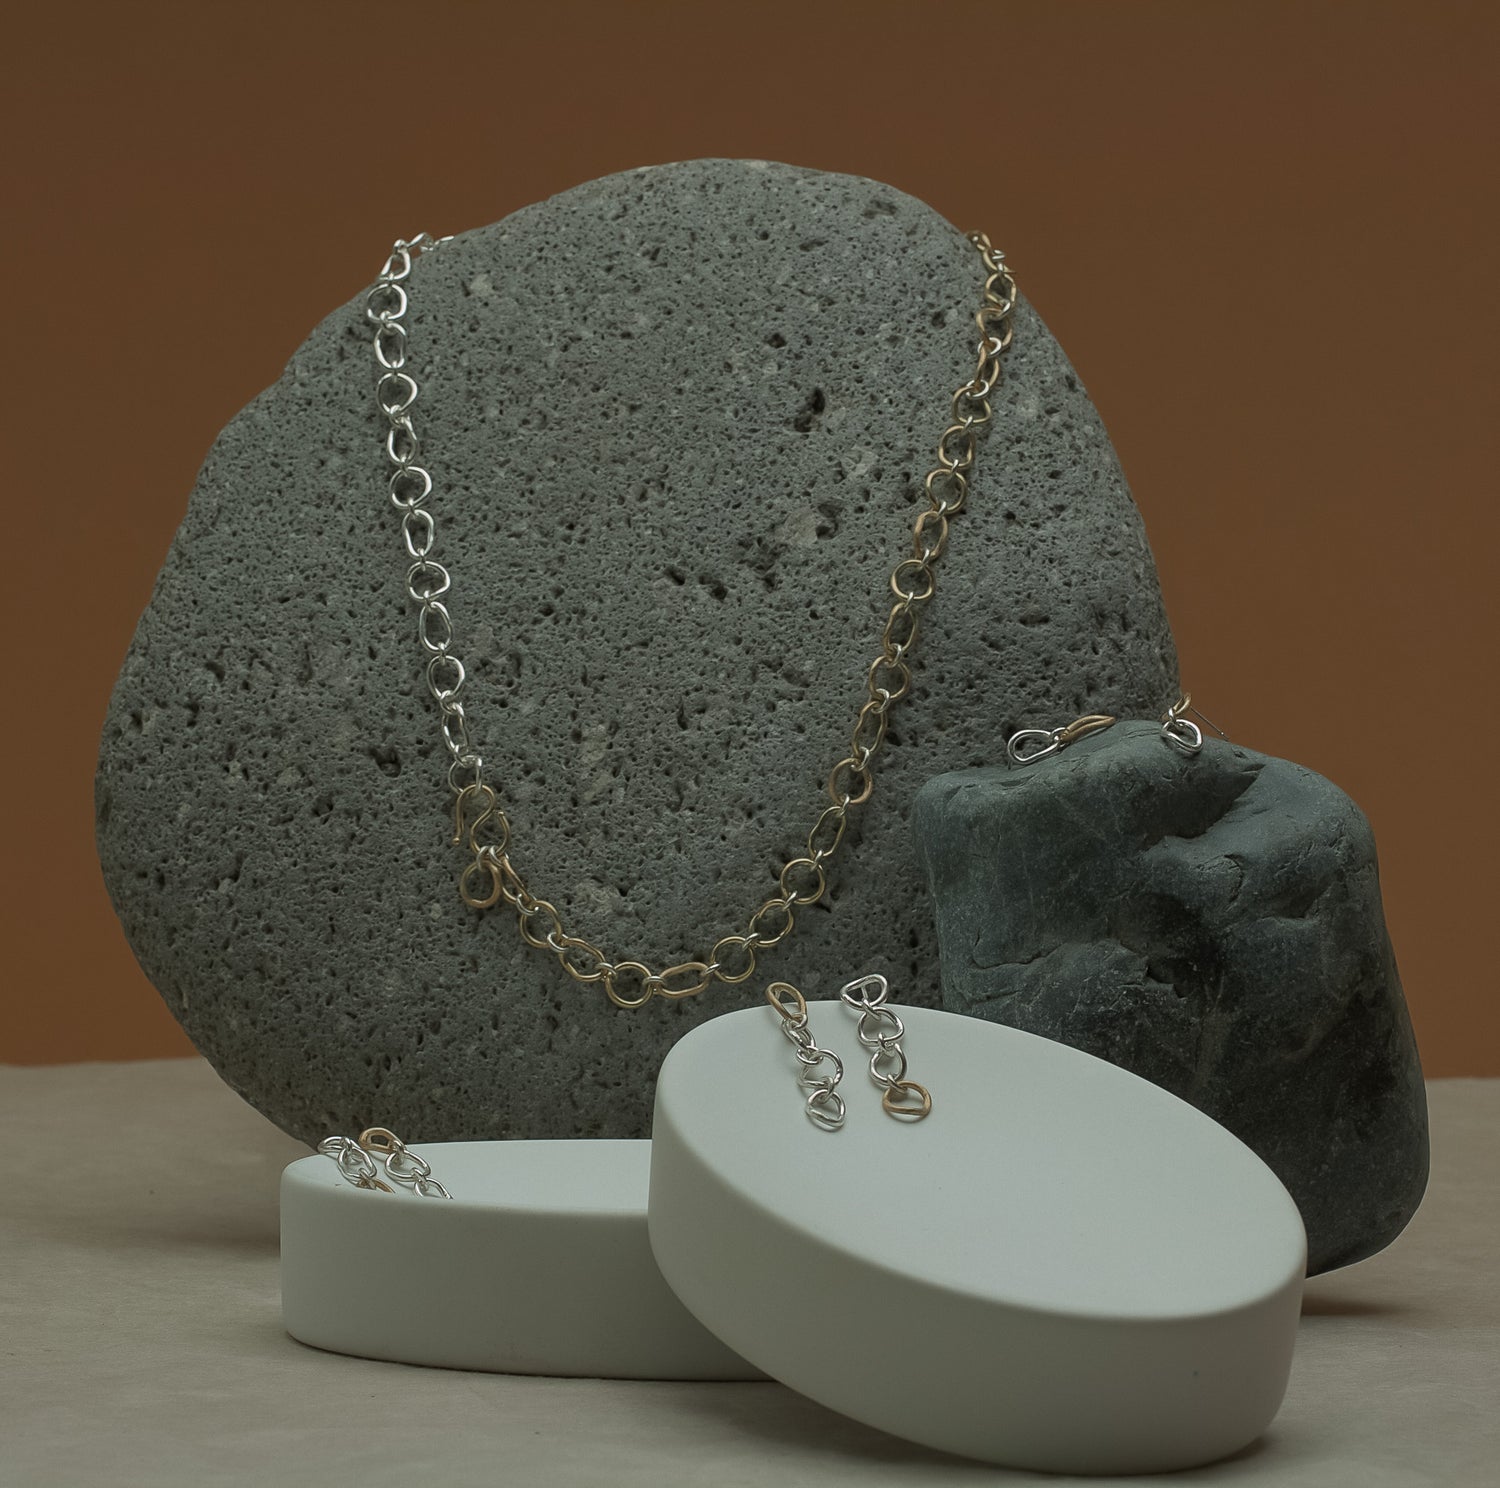 Gold and silver handcrafted organic shaped chain necklaces and earrings. Made in 14K and sterling silver .